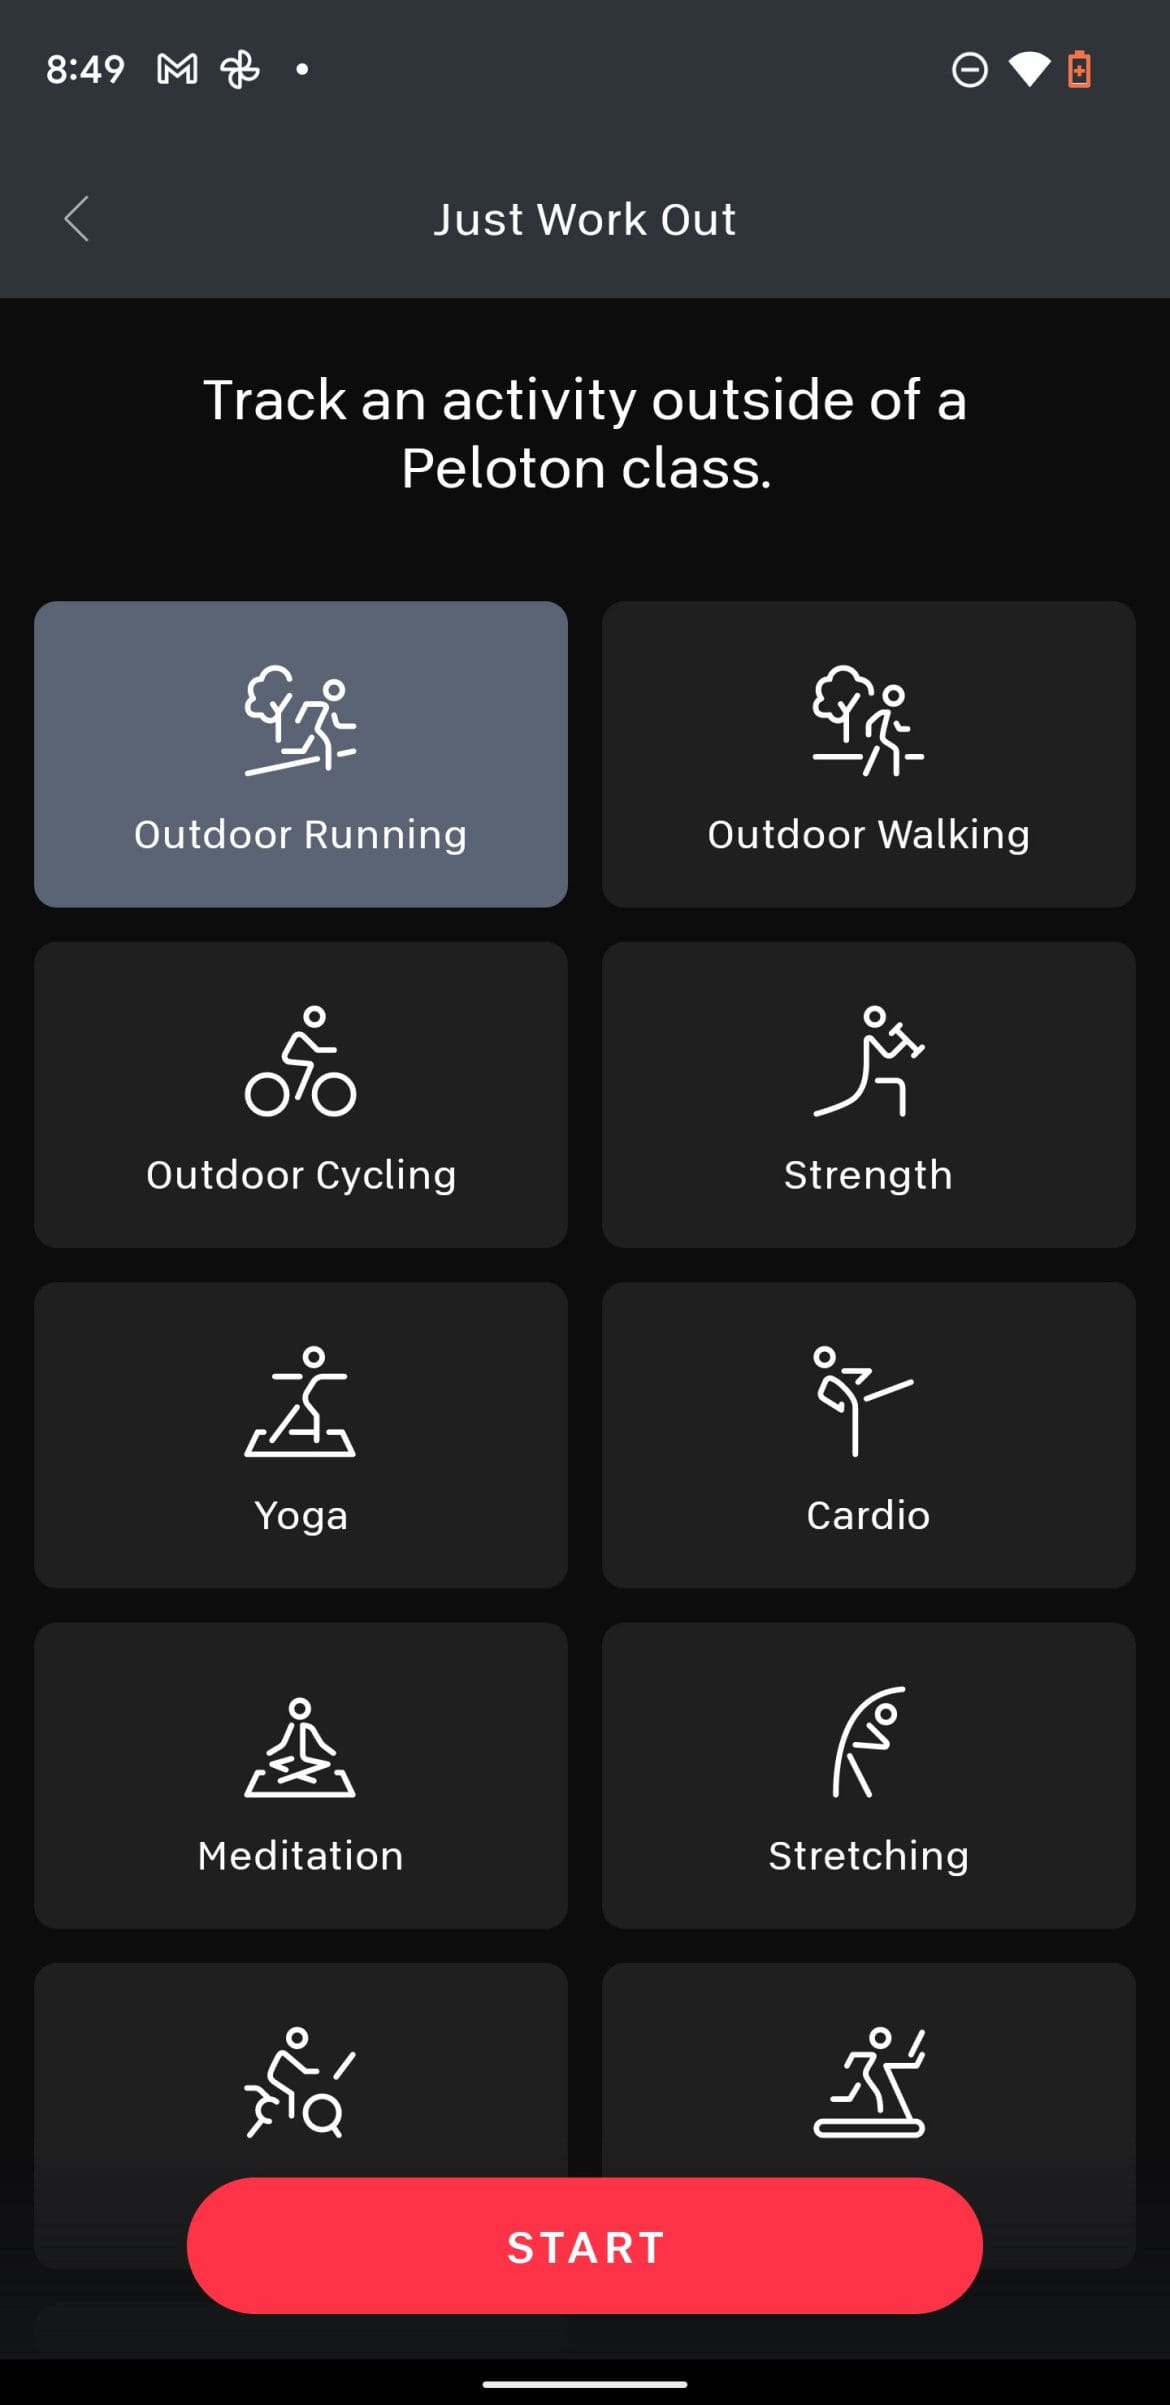 Just Work Out on Android App